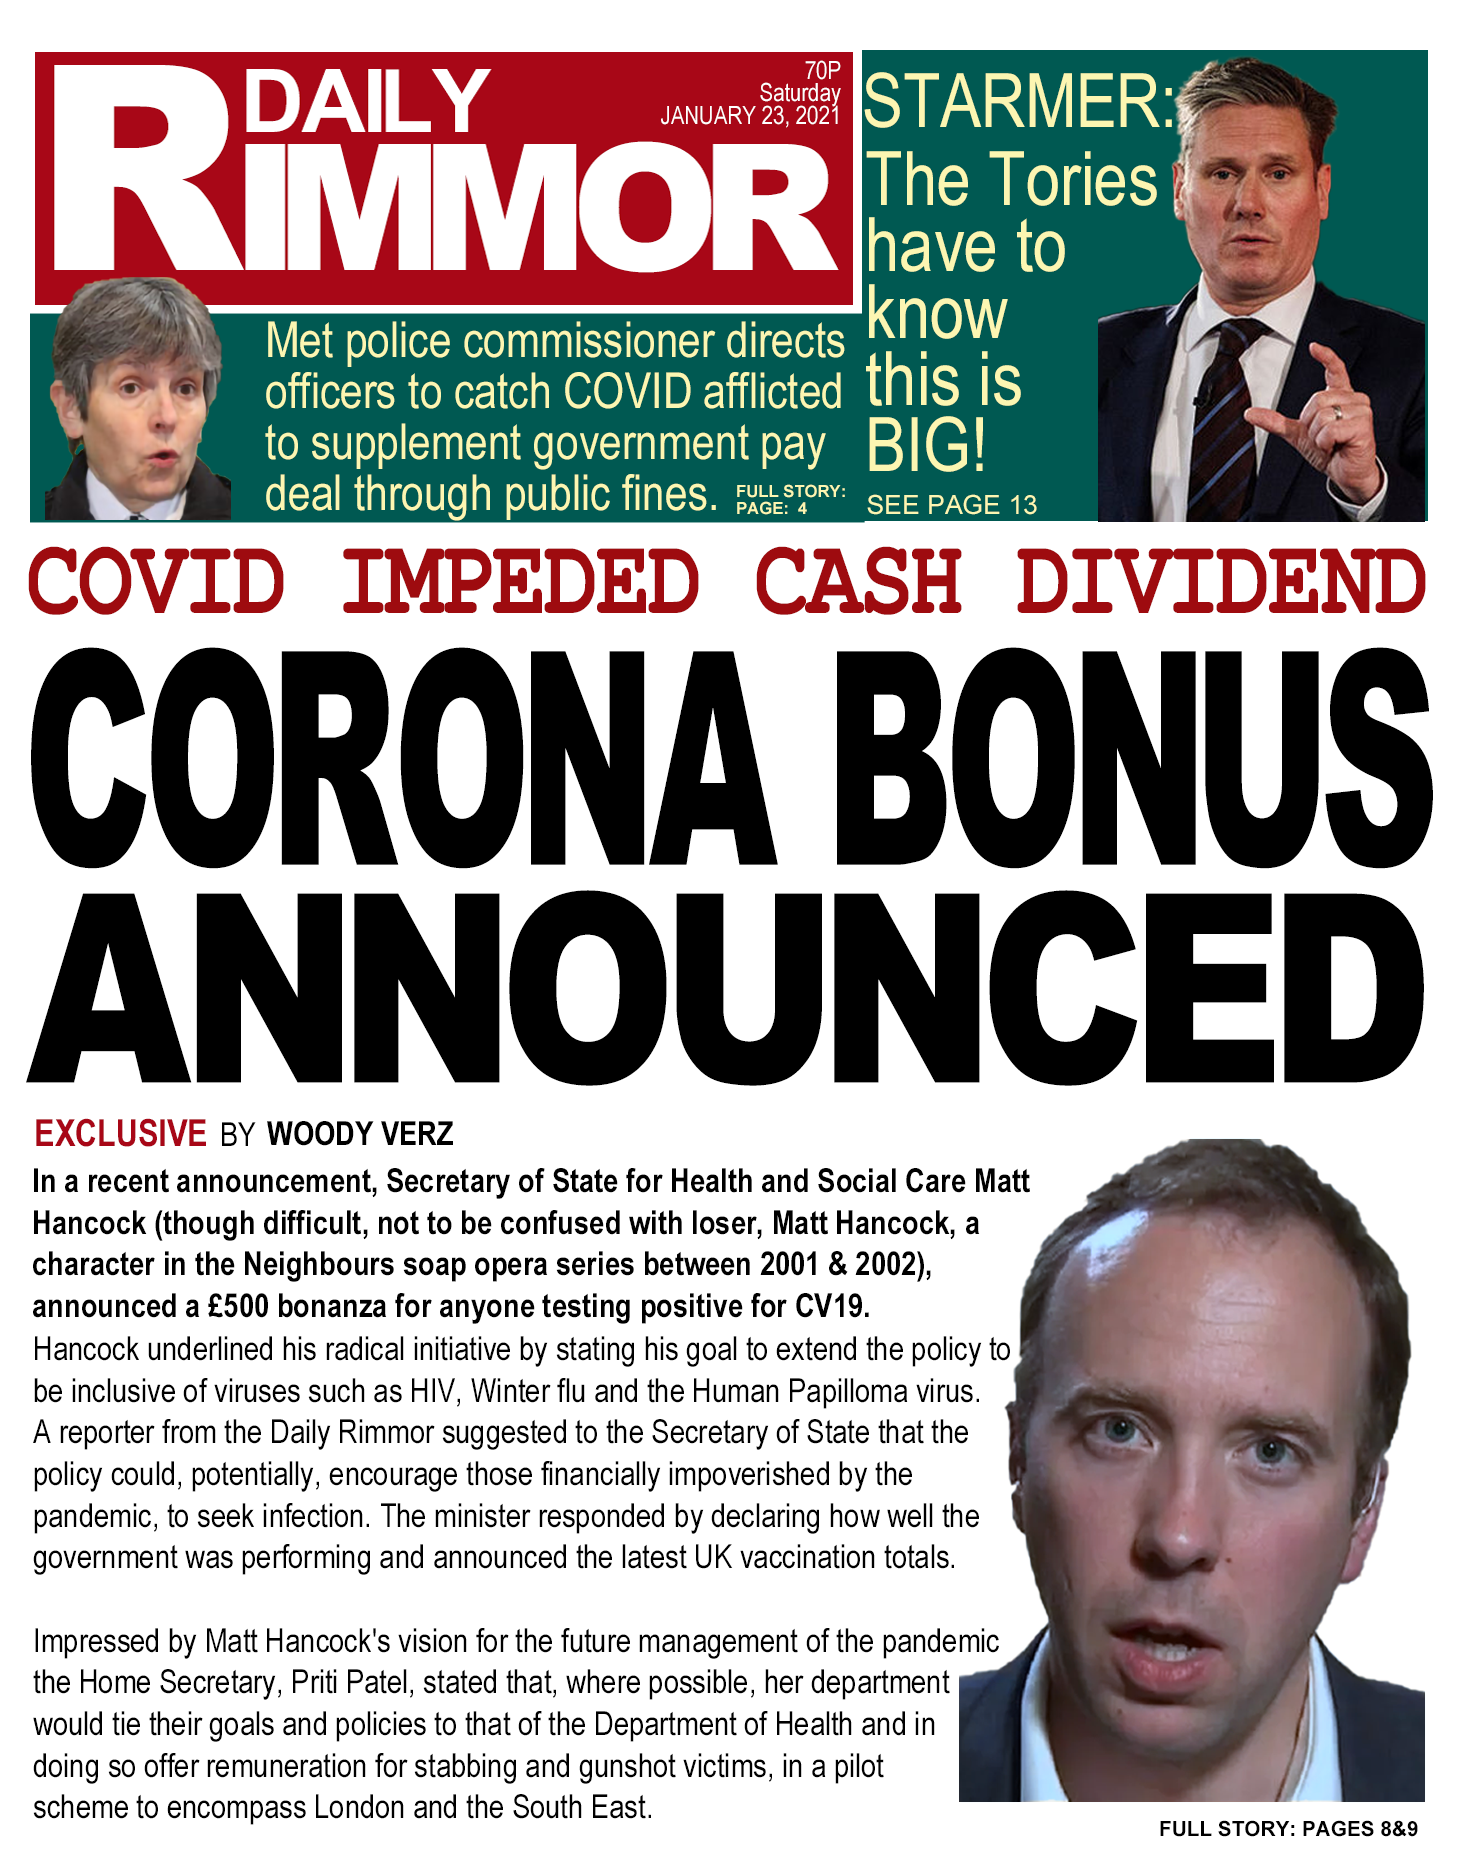 Daily Rimmor front page. COVID-19, Saturday 23th January